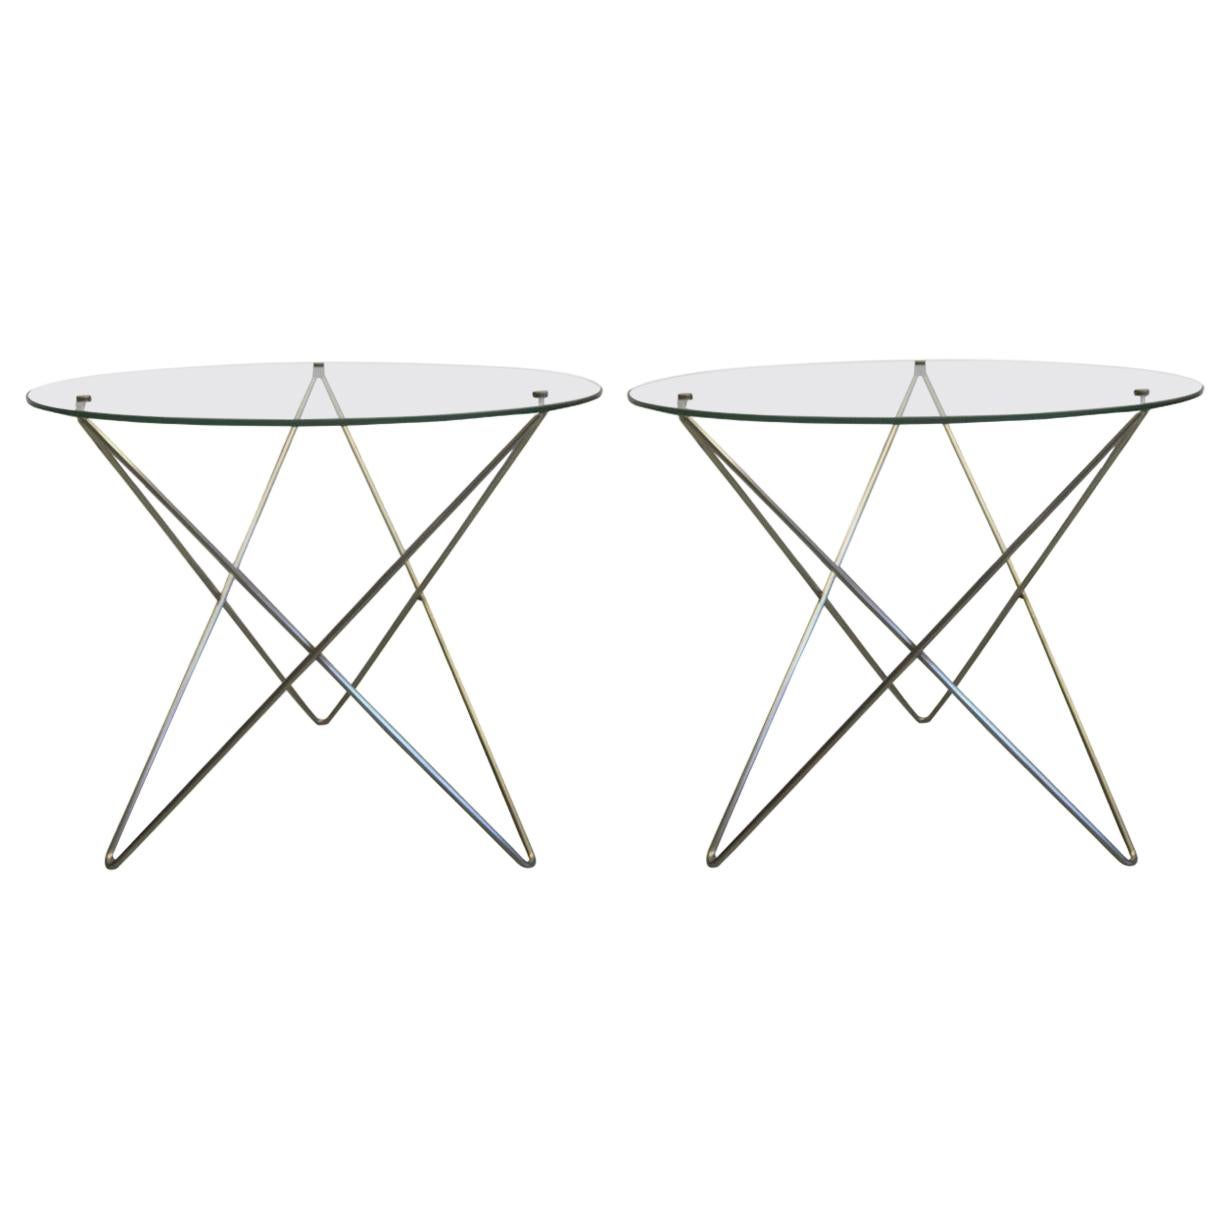 Italian Midcentury Stainless Steel and Glass Side Tables, Carlo Paccagnini, Pair For Sale